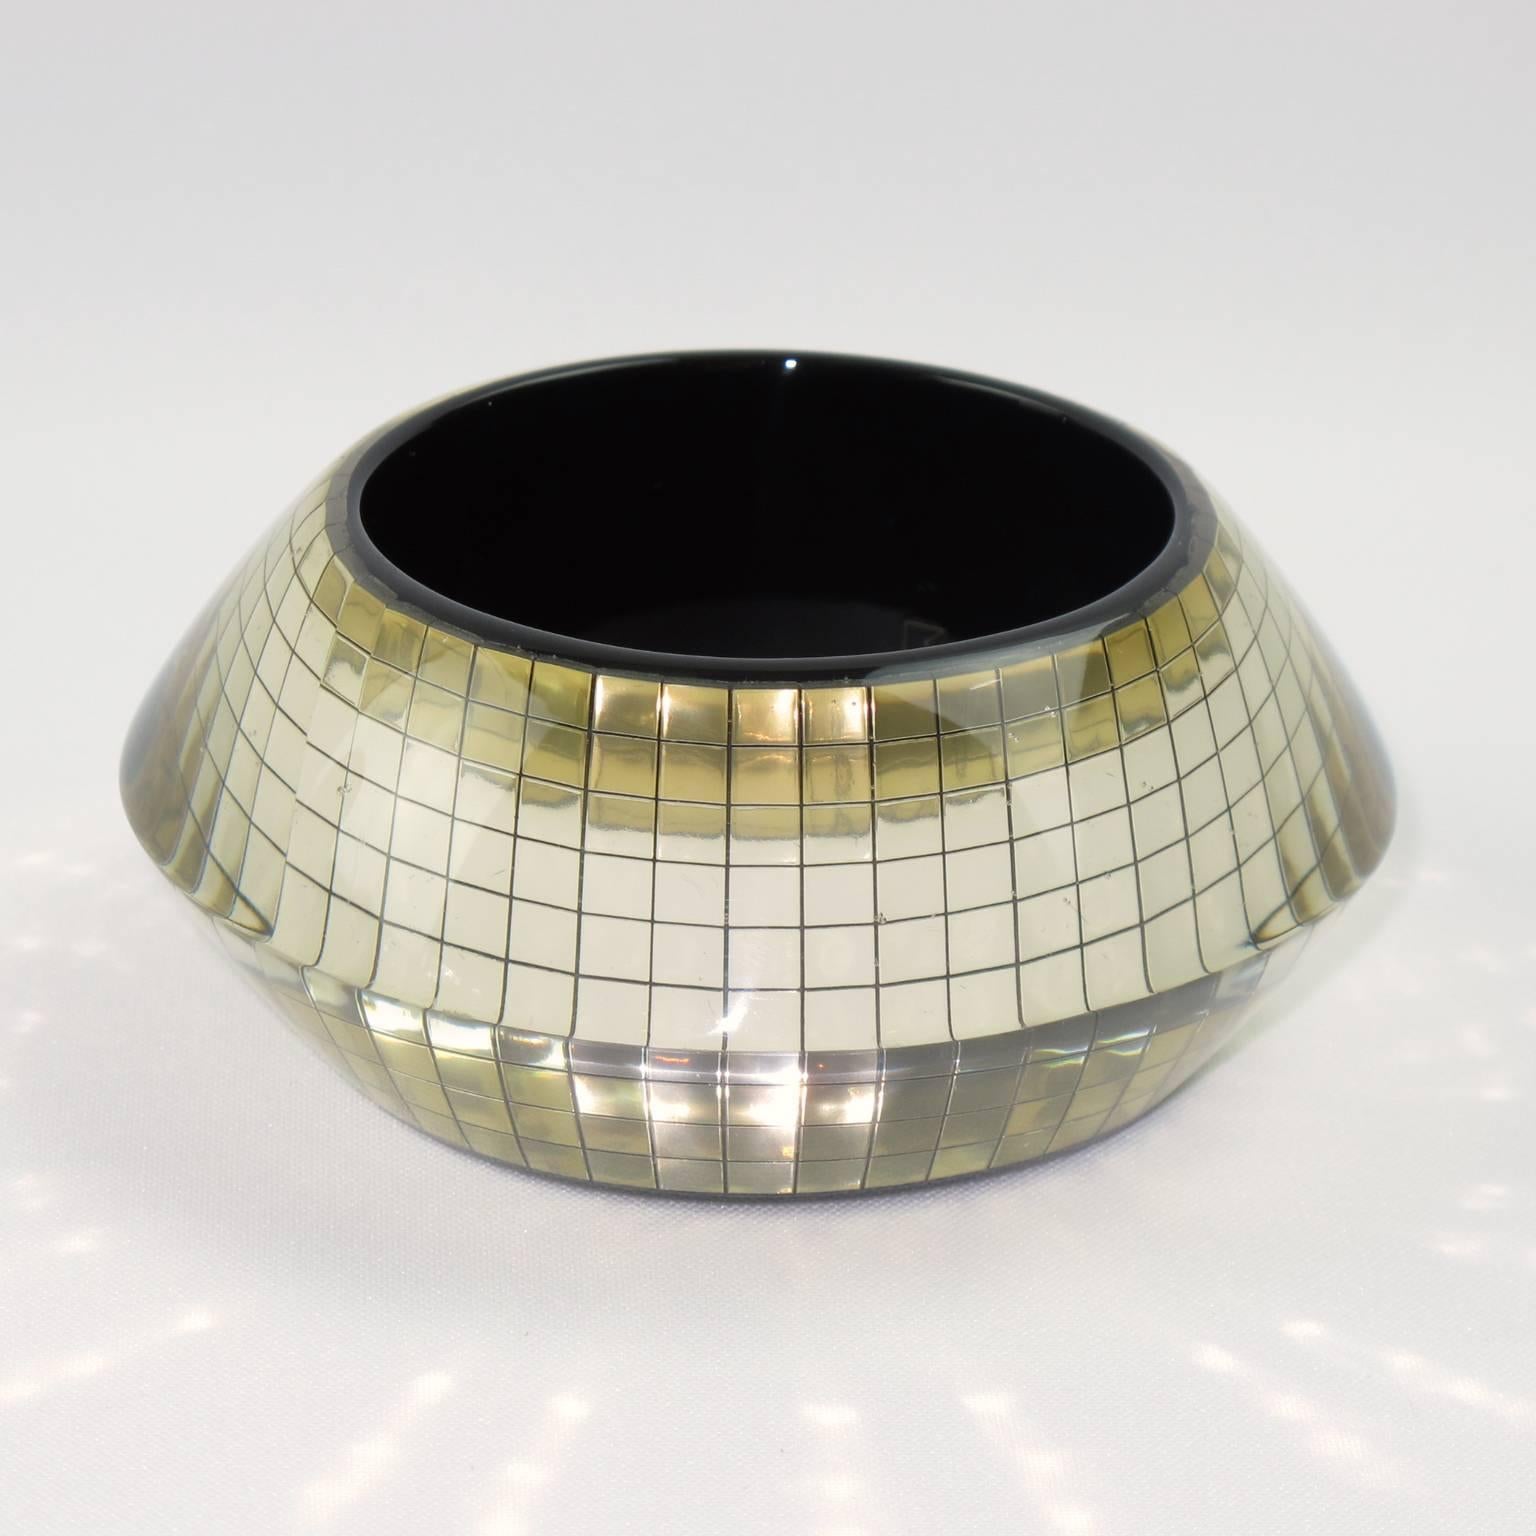 Impressive chunky Space Age Lucite bracelet bangle. Oversized flying saucer crystal clear carved shape with faceted tiny mirrors inclusions and black background. Extremely glittering pattern. France, circa 1960s. Excellent vintage